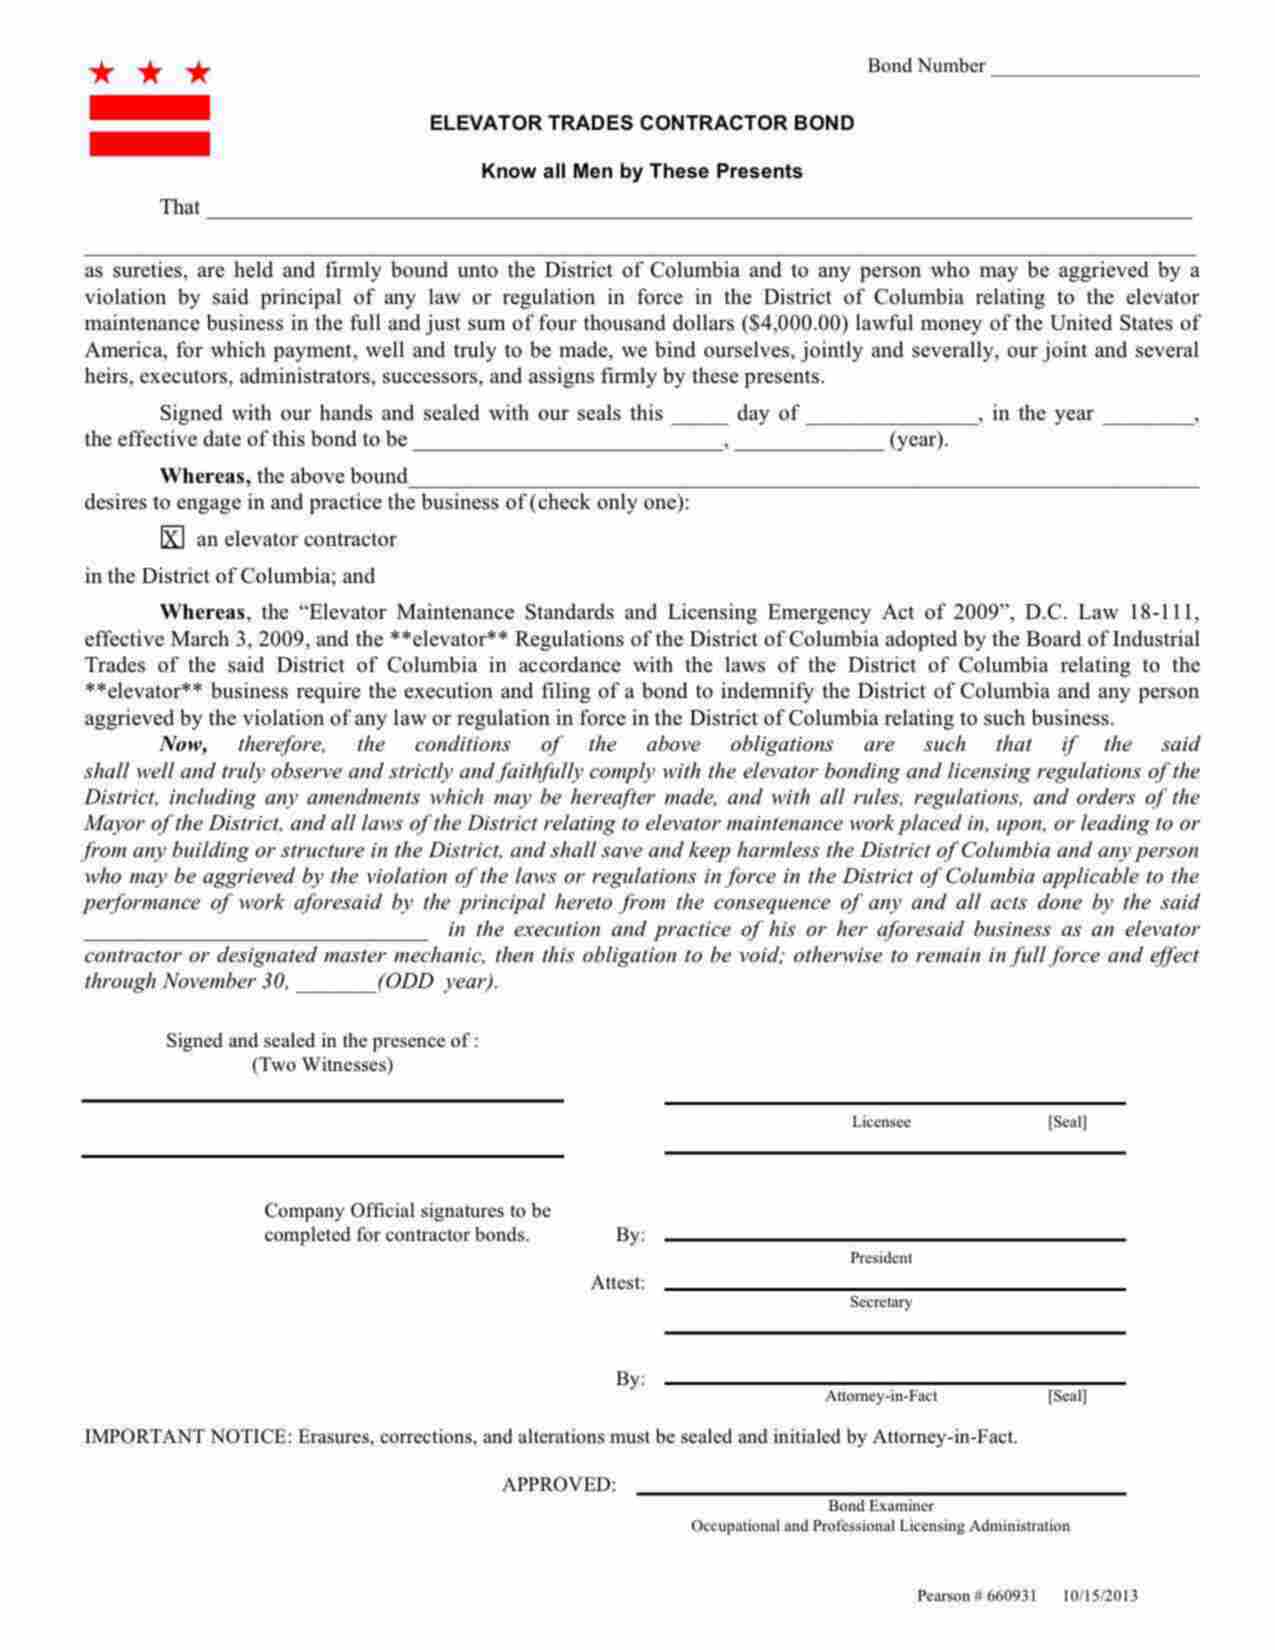 District of Columbia Elevator Contractor Bond Form